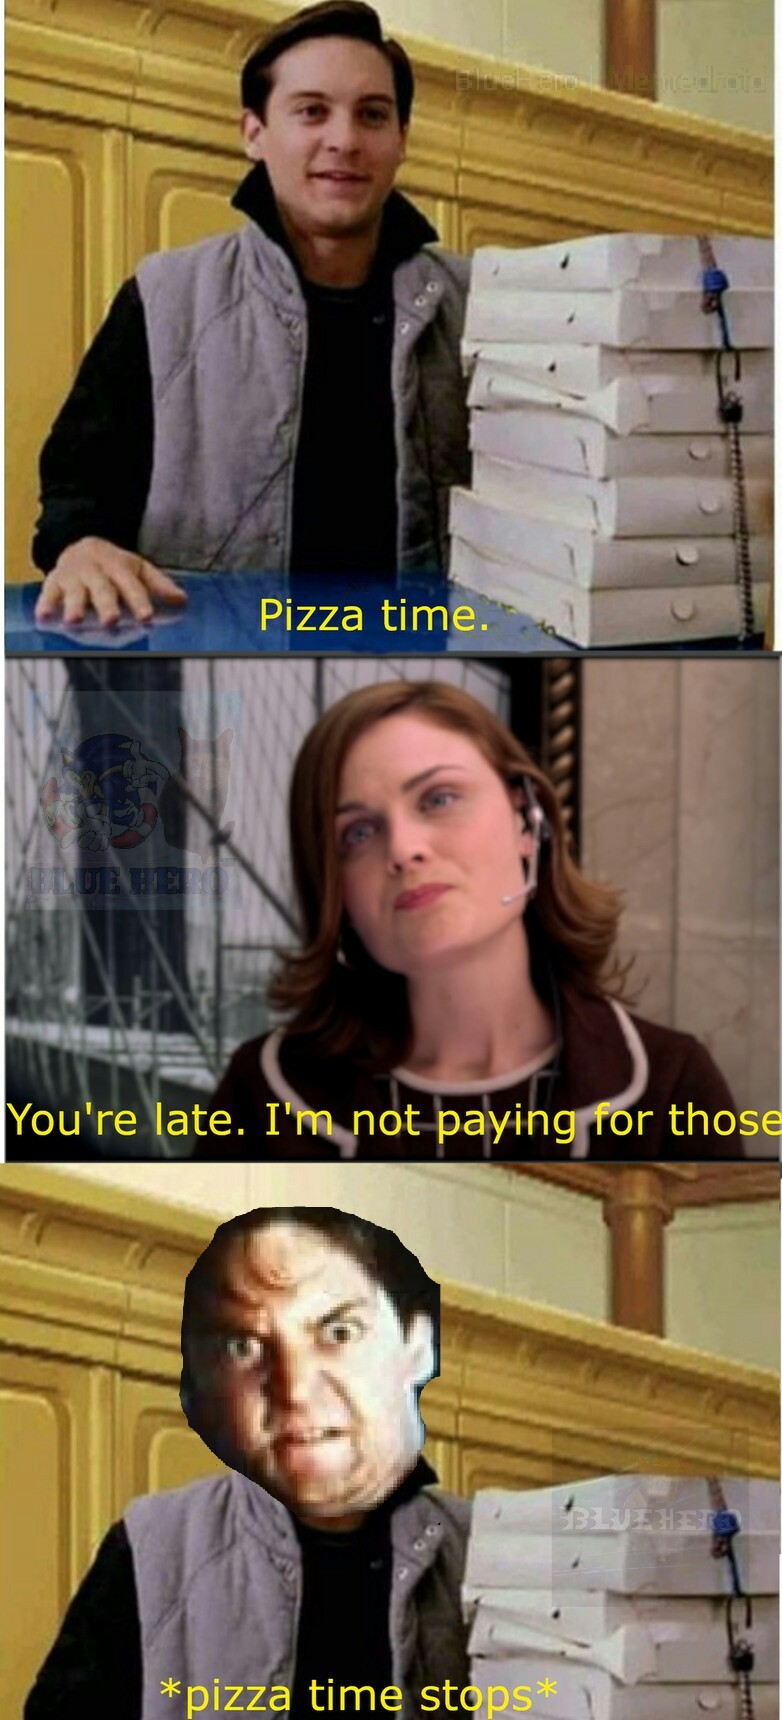 No pizza for you then bitch - meme